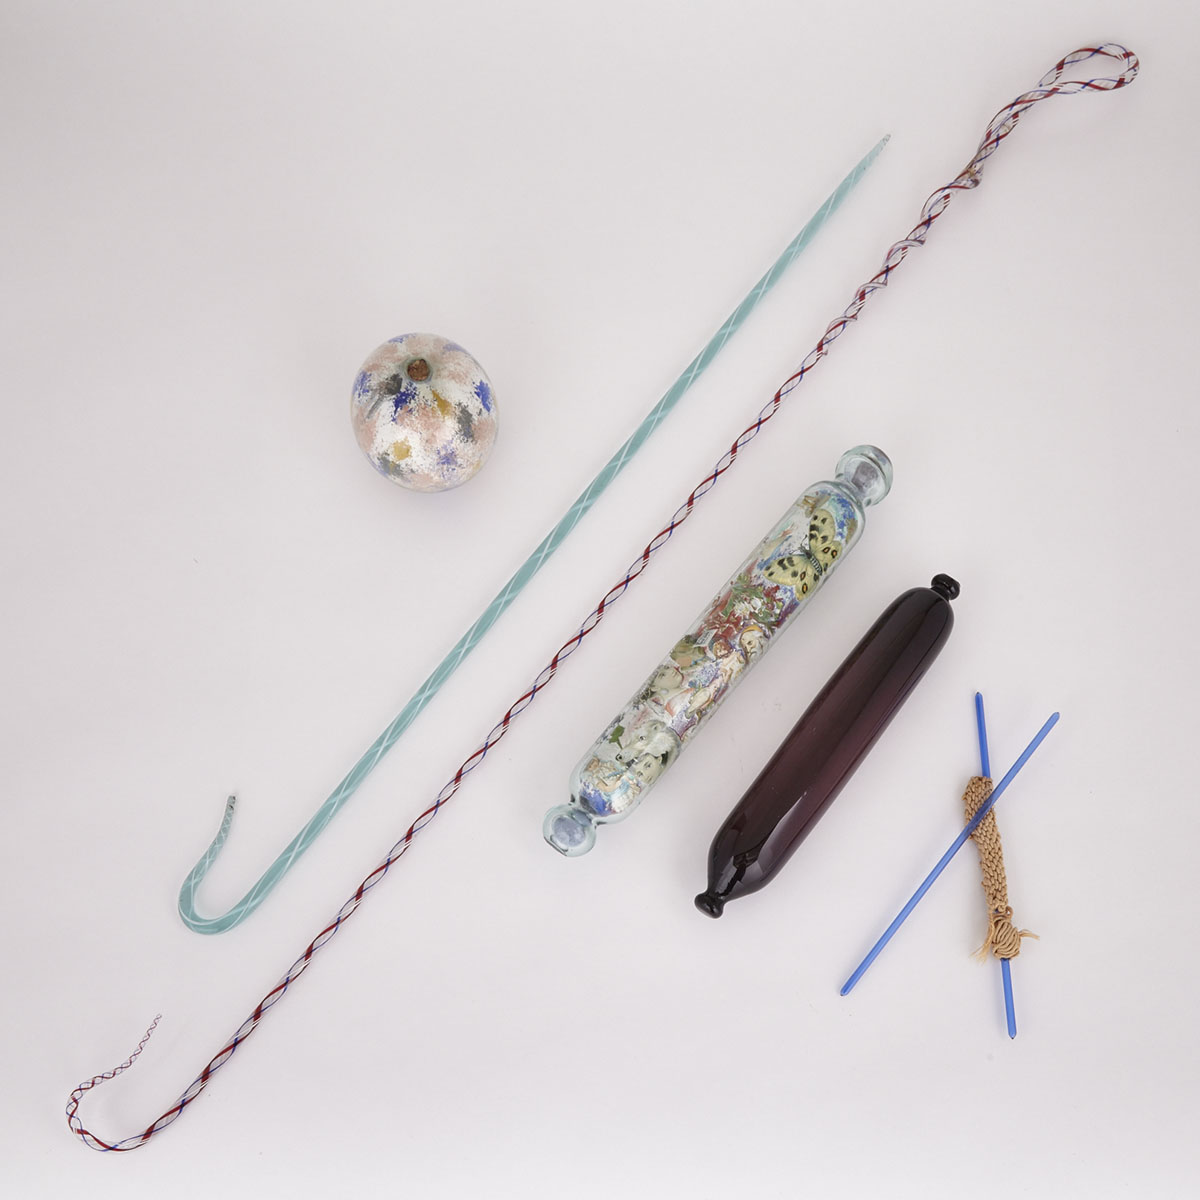 Nailsea-Type Coloured Glass Whip, Cane, Witch’s Ball, Pair of Knitting Needles and Two Rolling Pins, 19th century